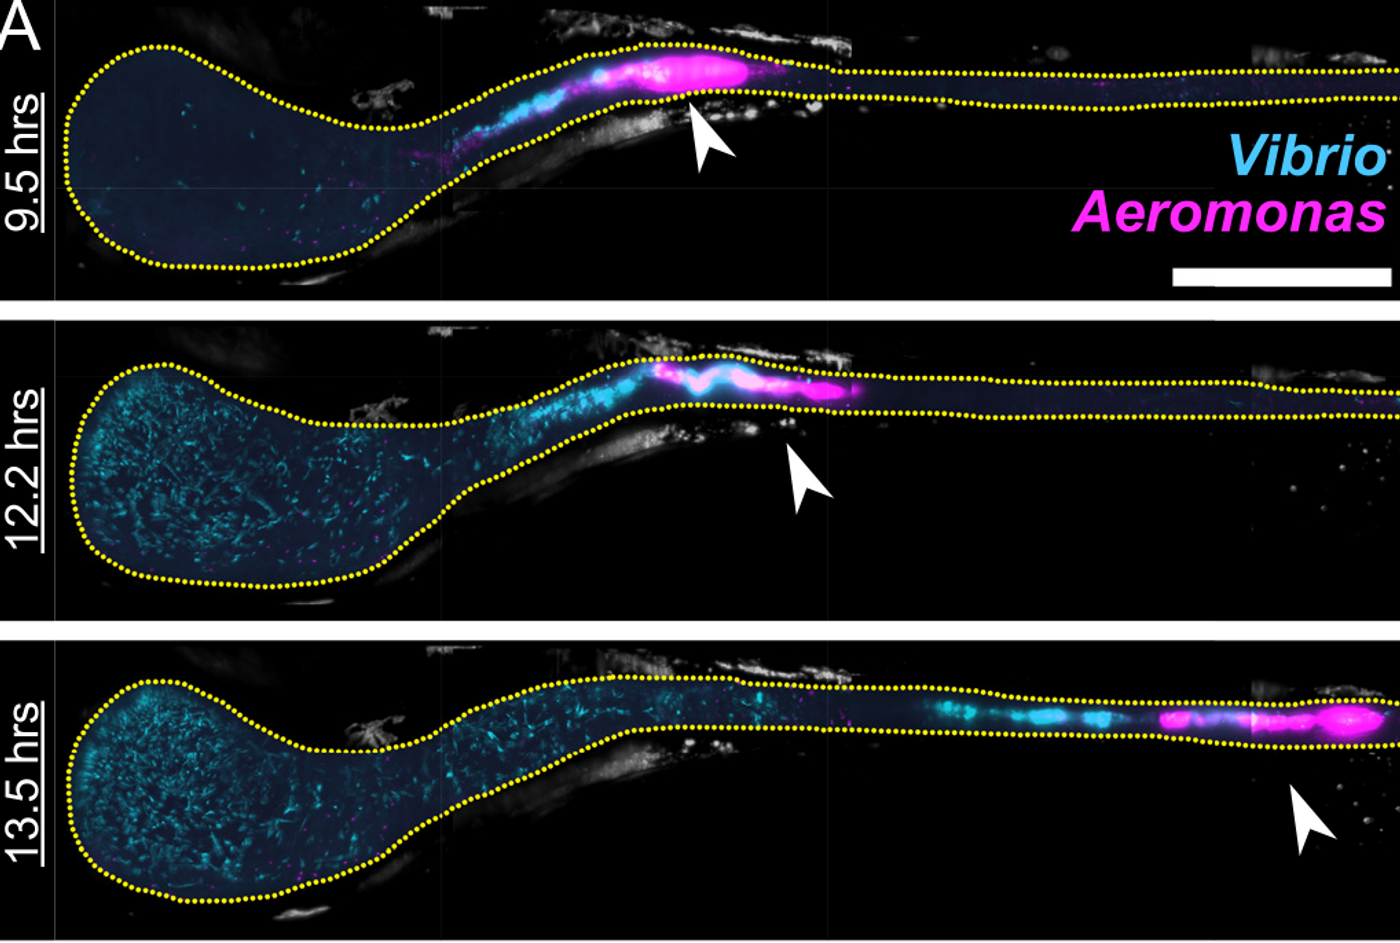 MIPs of Aeromonas (magenta) and Vibrio (cyan) in a larval zebrafish intestine. Scale bar: 200 ?m. The fish was initially colonized at 4 dpf with Aeromonas, challenged 24 hr later by inoculation with Vibrio, and then imaged every 20 min for 14 hr. The times indicated denote hours post-challenge. In all images, the region shown spans about 80% of the intestine, with the anterior on the left. Image contrast in both color channels is enhanced for clarity. Yellow dotted line roughly indicates the lumenal boundary. As time progresses, the anterior growth of Vibrio as well as abrupt changes in the Aeromonas distribution (arrows) are evident. / Credit: PLOS Biology Wiles et al